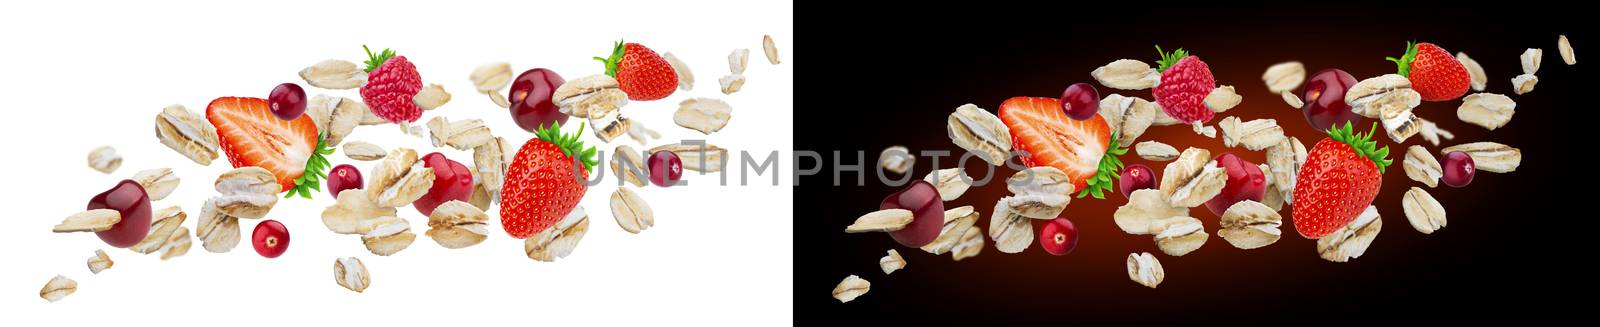 Flying oat flakes with berries isolated on white and black backgrounds by xamtiw